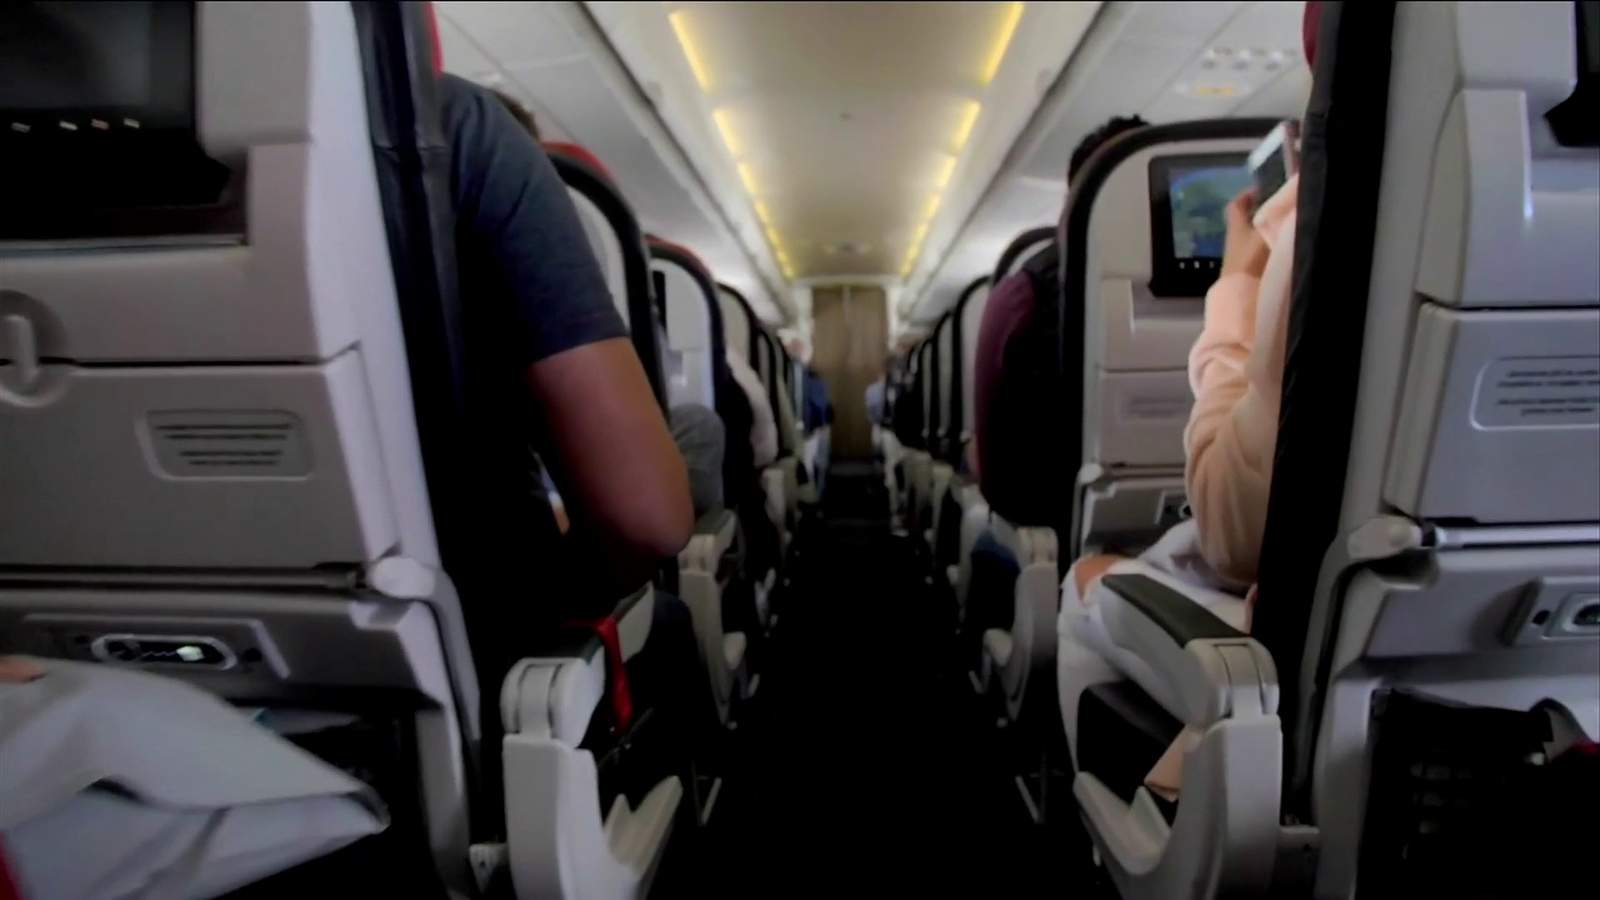 FAA: Airlines have reported more than 500 unruly passengers